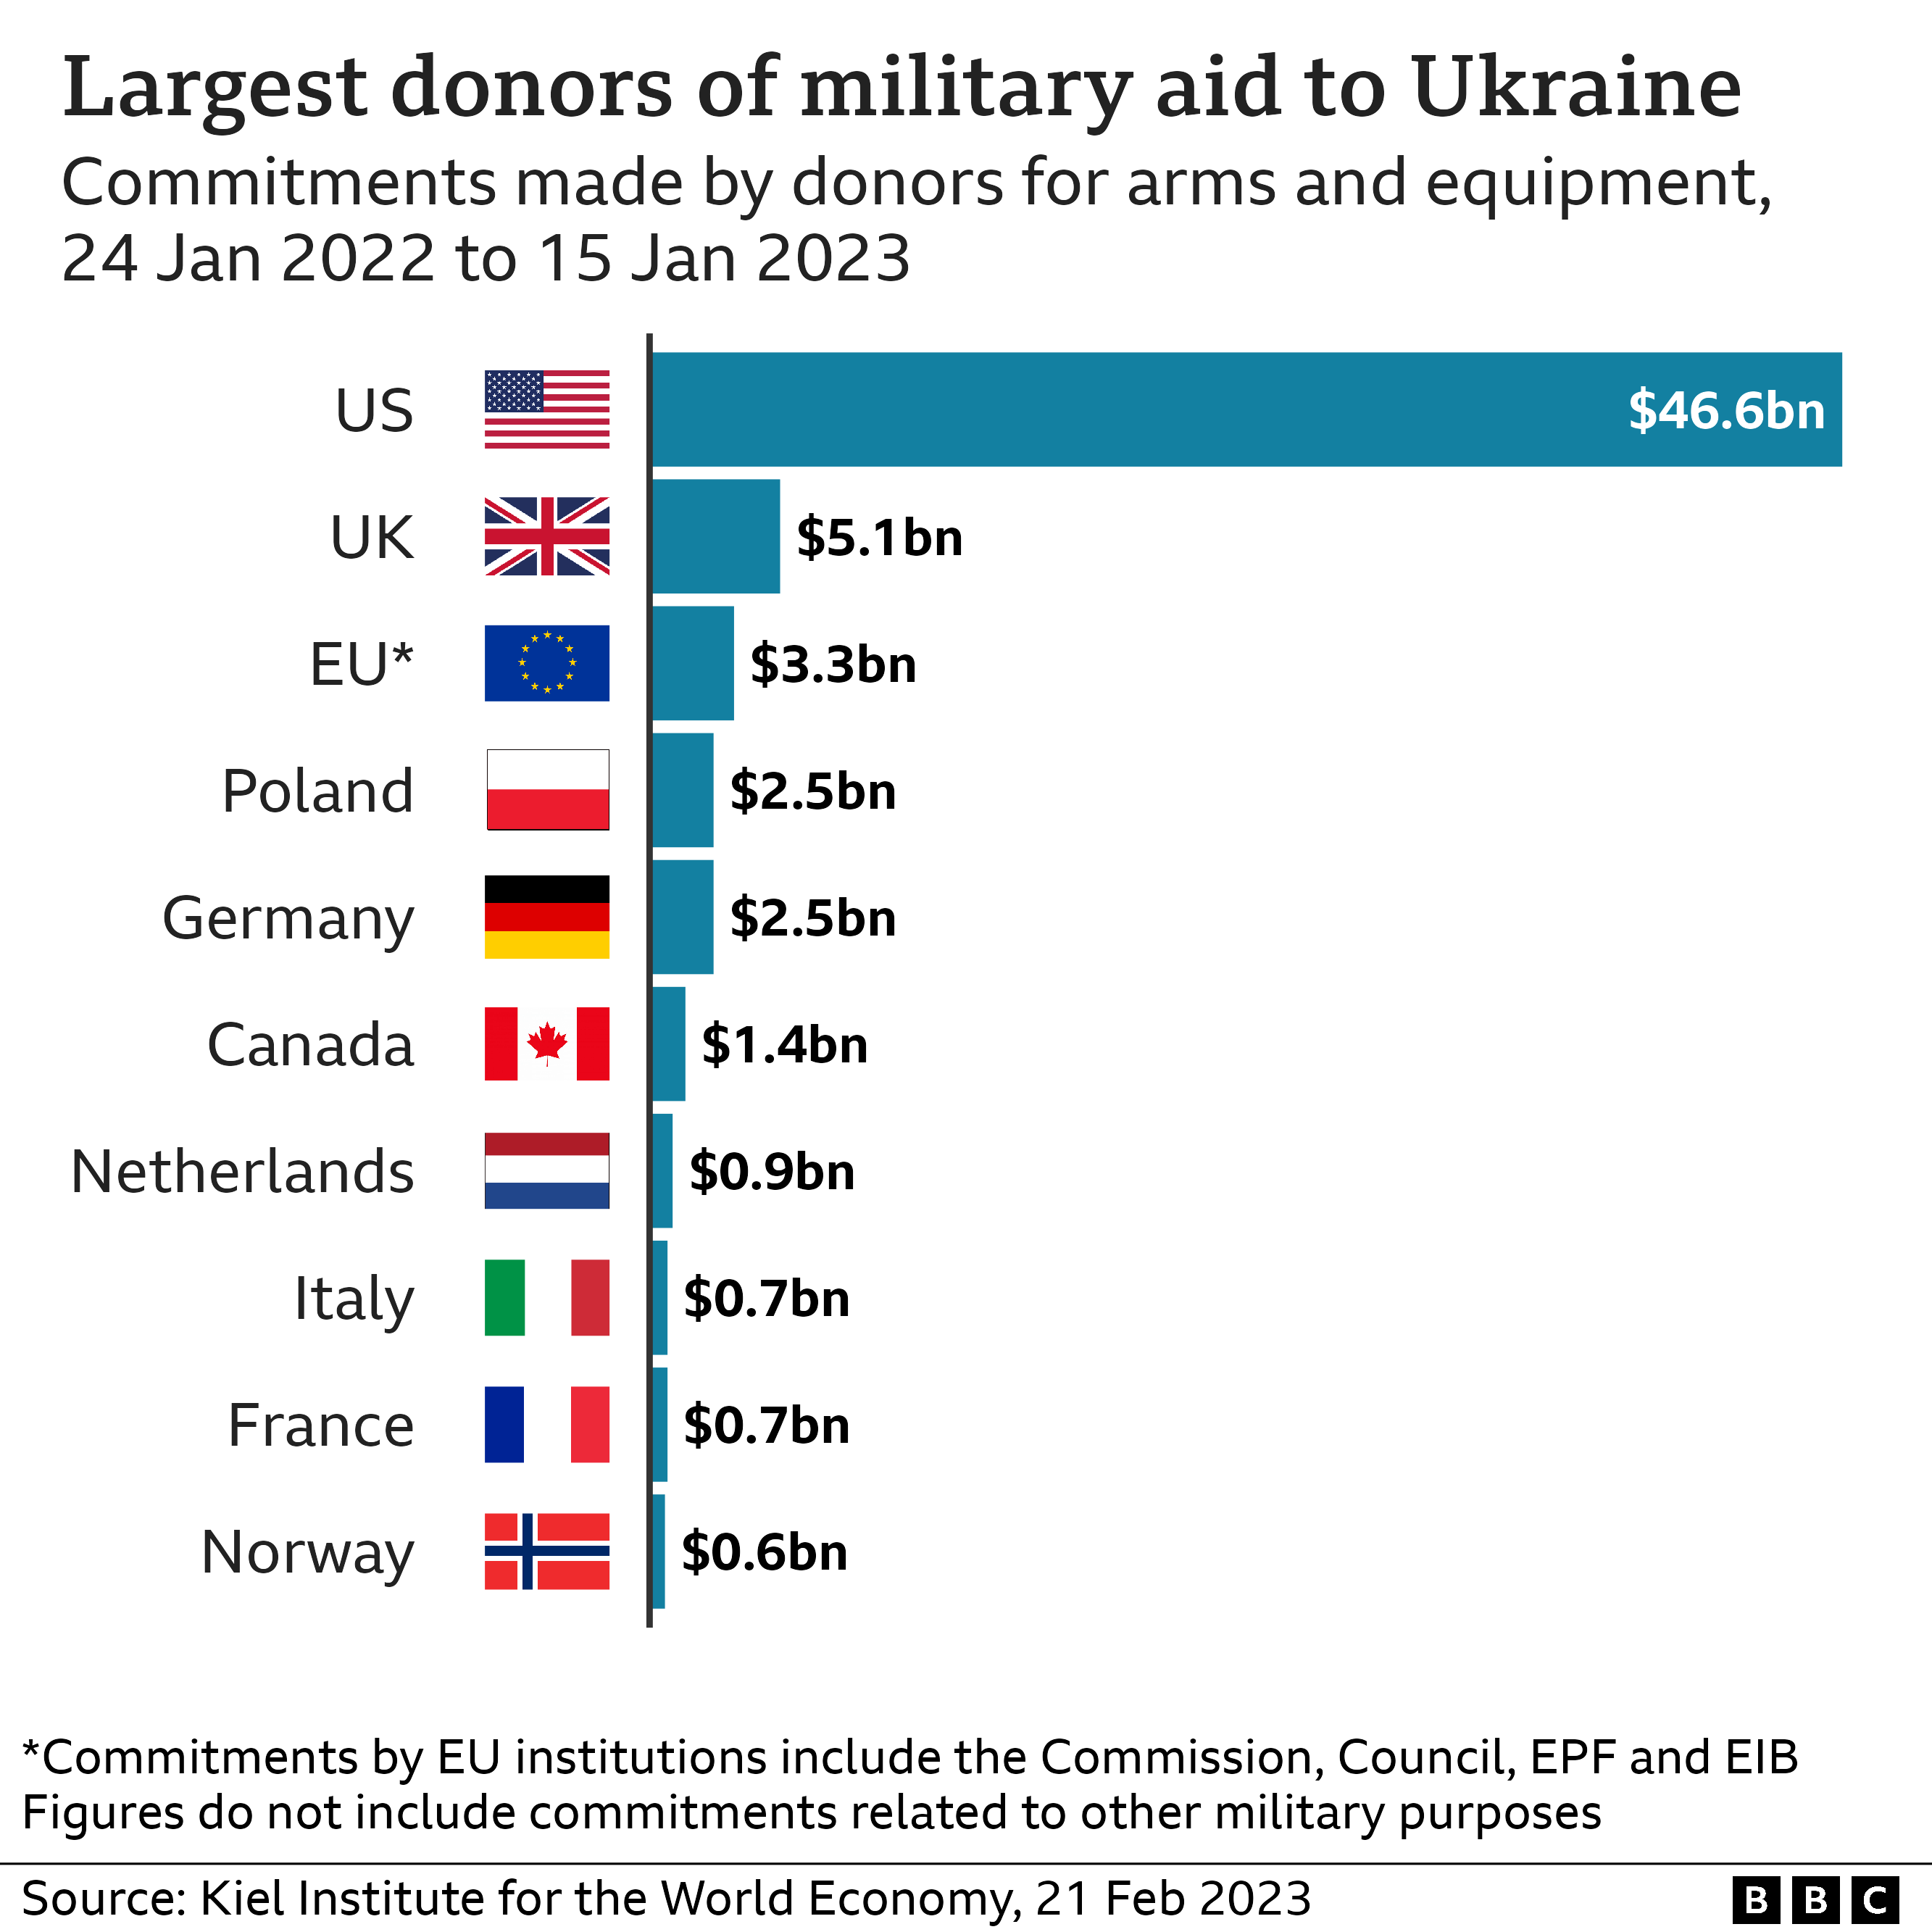 Largest donors of military aid to Ukraine by country.